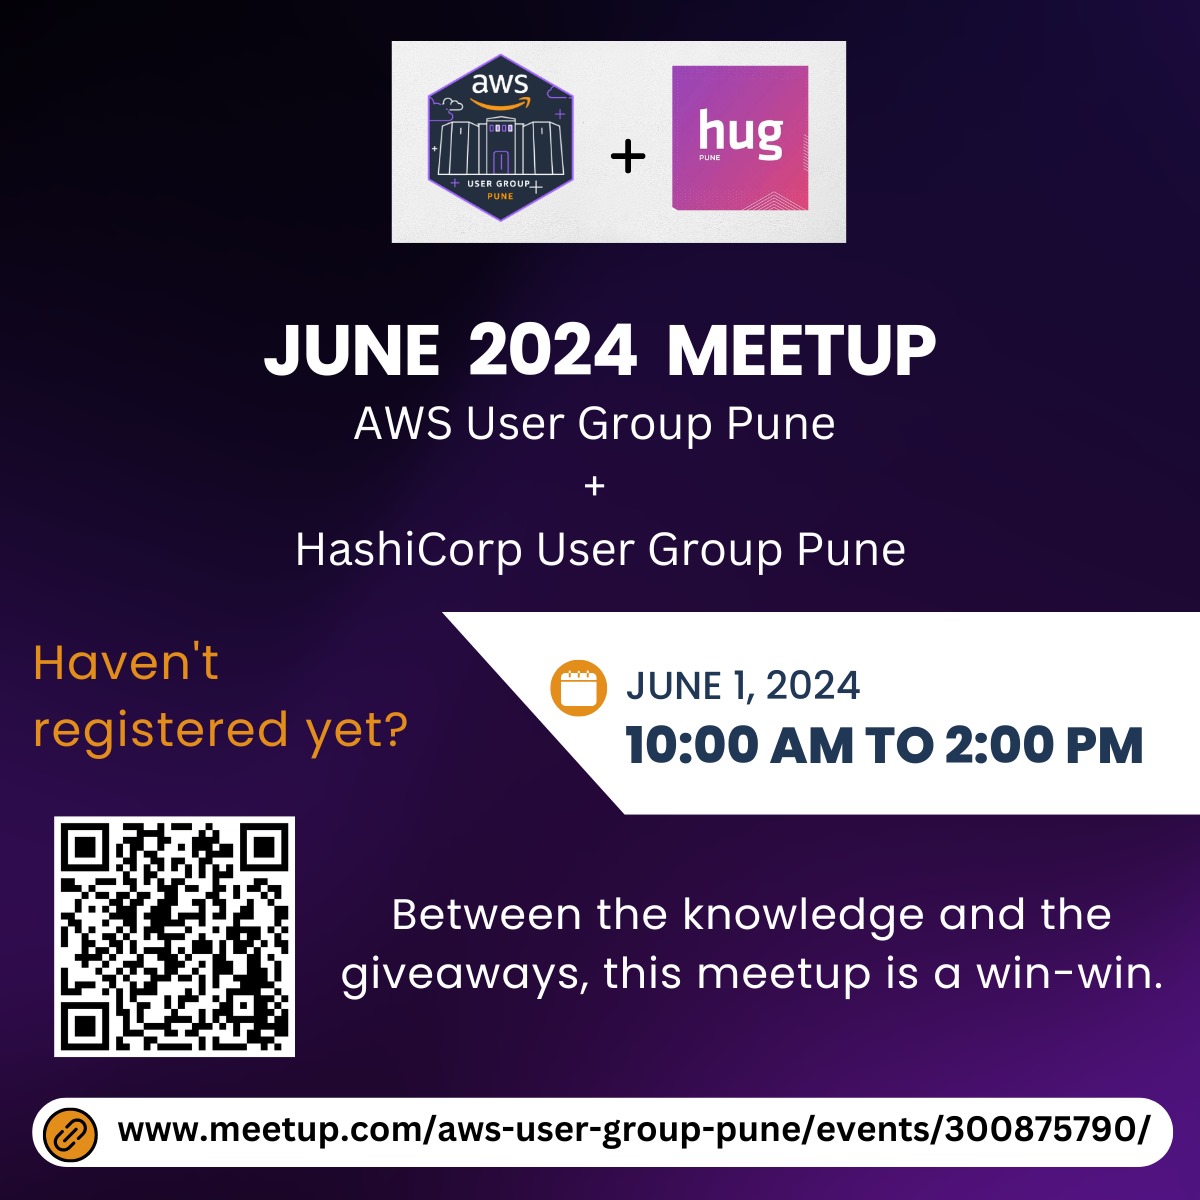 🌟 Reminder: AWS + HashiCorp User Group Pune Meetup is THIS Saturday, June 1st! 📅

💡 Deepen your knowledge
🤝 Network with fellow enthusiasts
🎉 Enjoy giveaways and swag!

Haven't registered yet? Secure your spot now
🕒 10 AM - 2 PM

See you there! 
#awsugpune #aws #cloud #pune